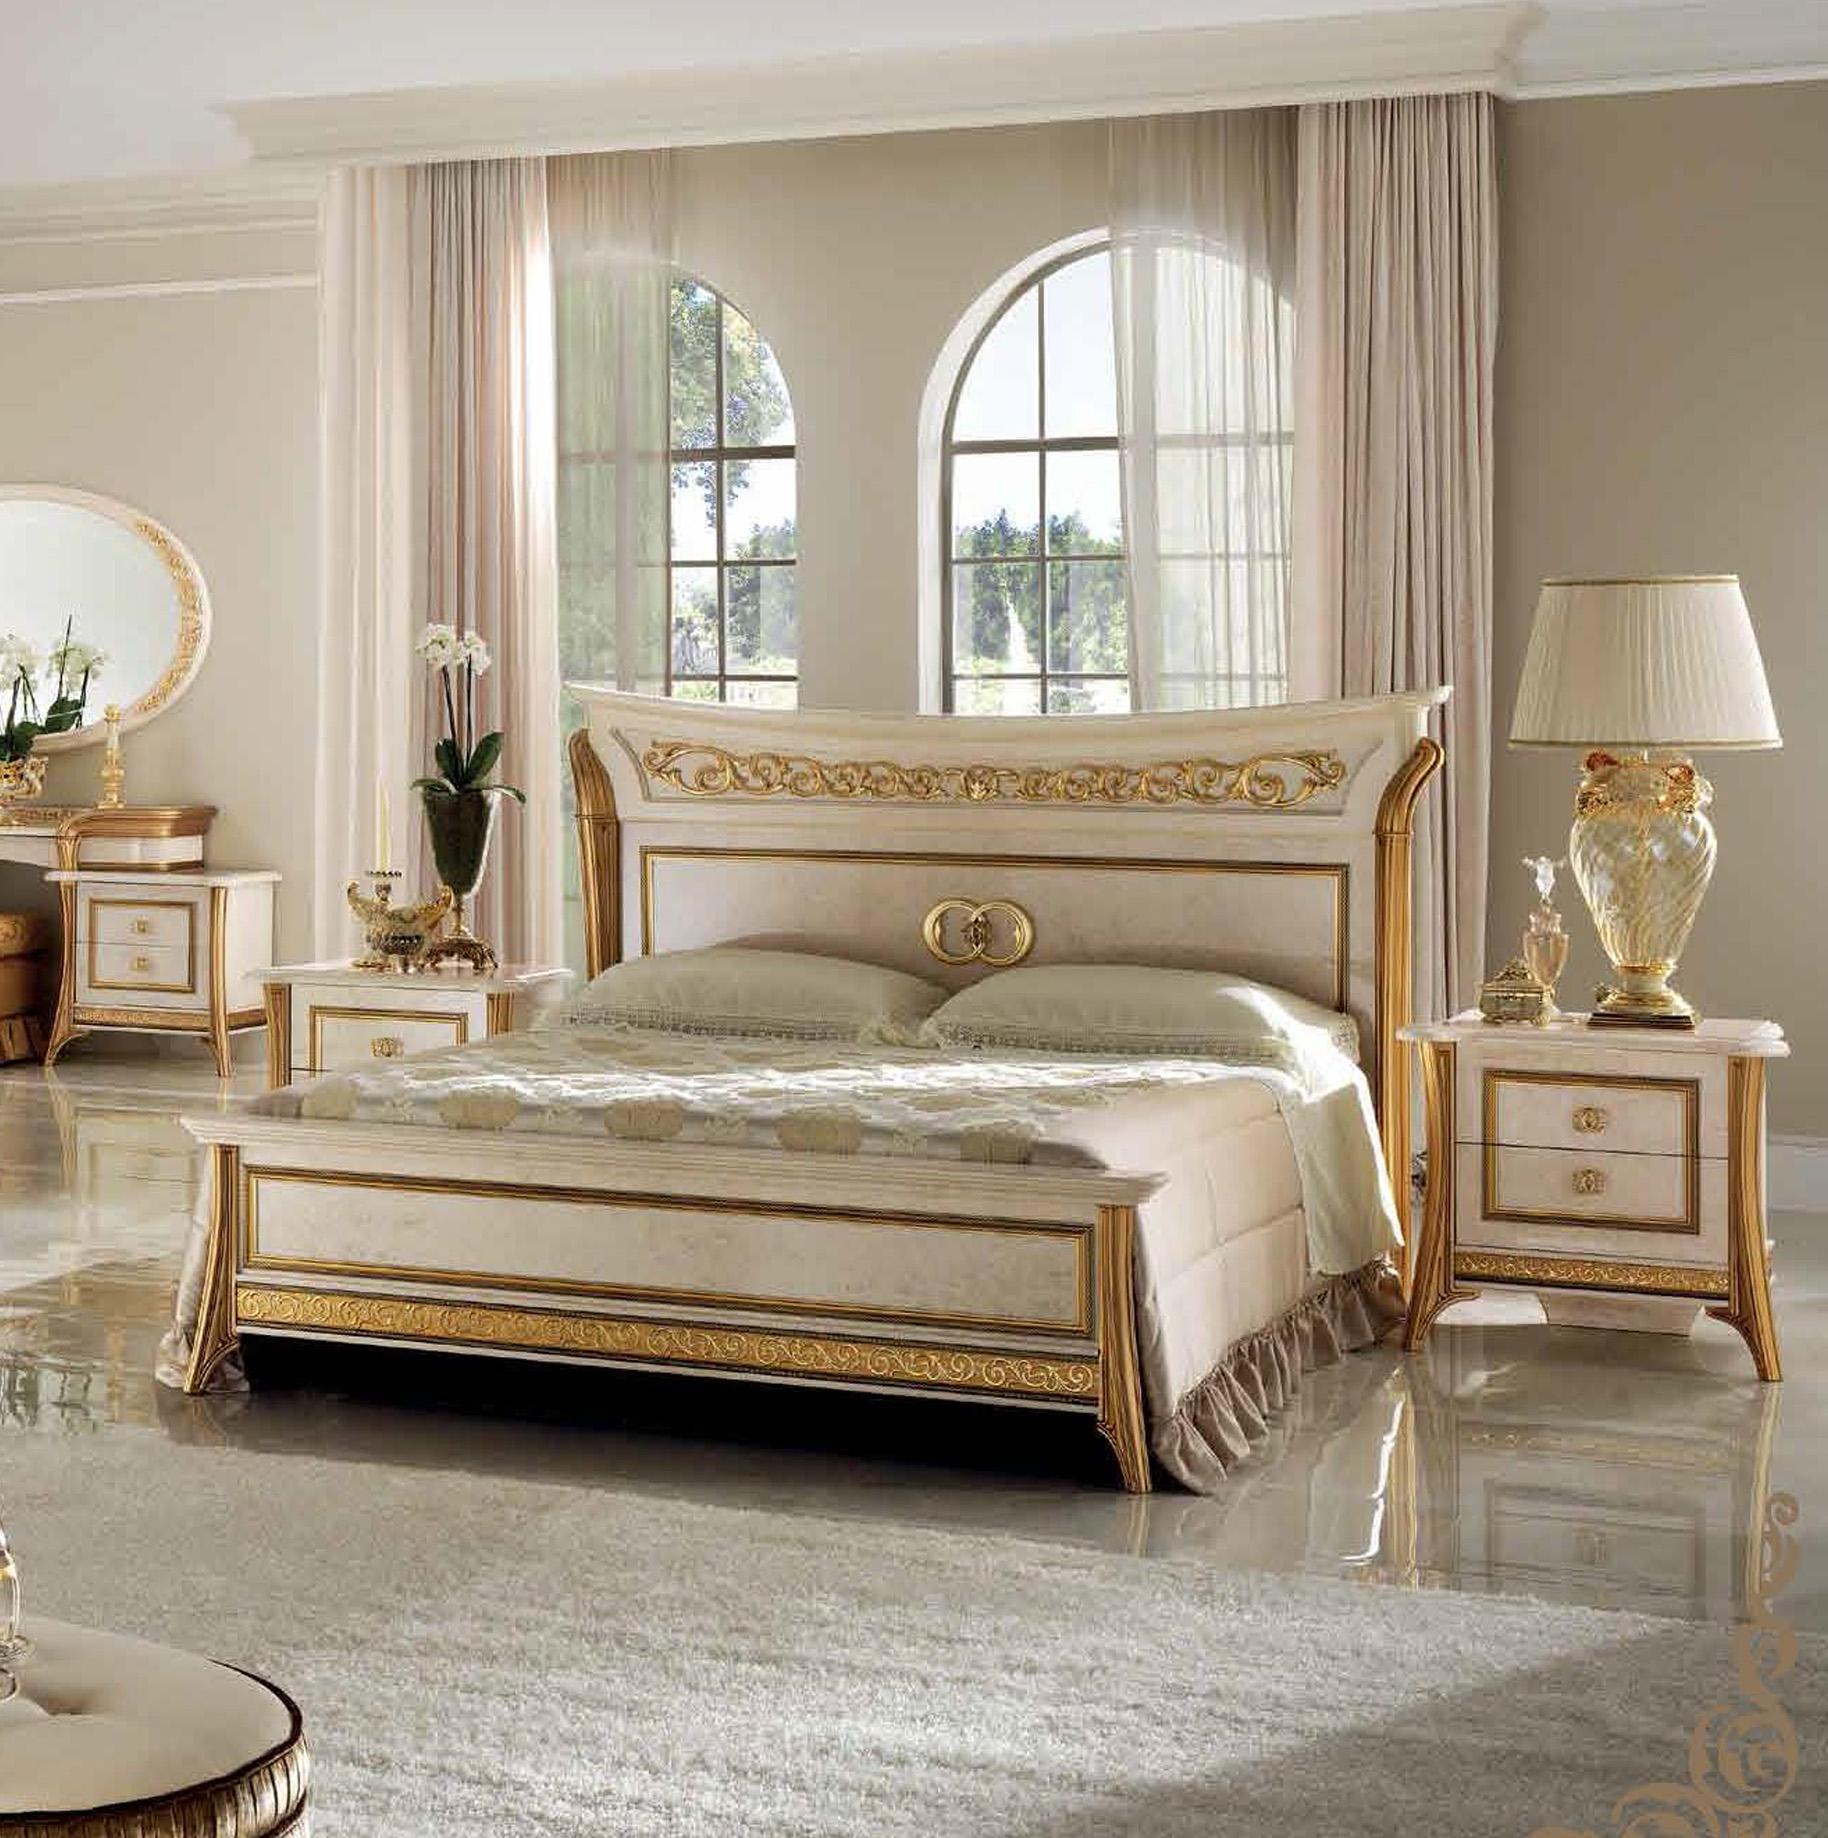 Classic, Traditional Platform Bed MELODIABEDQ.S MELODIABEDQ.S in Ivory, Gold 